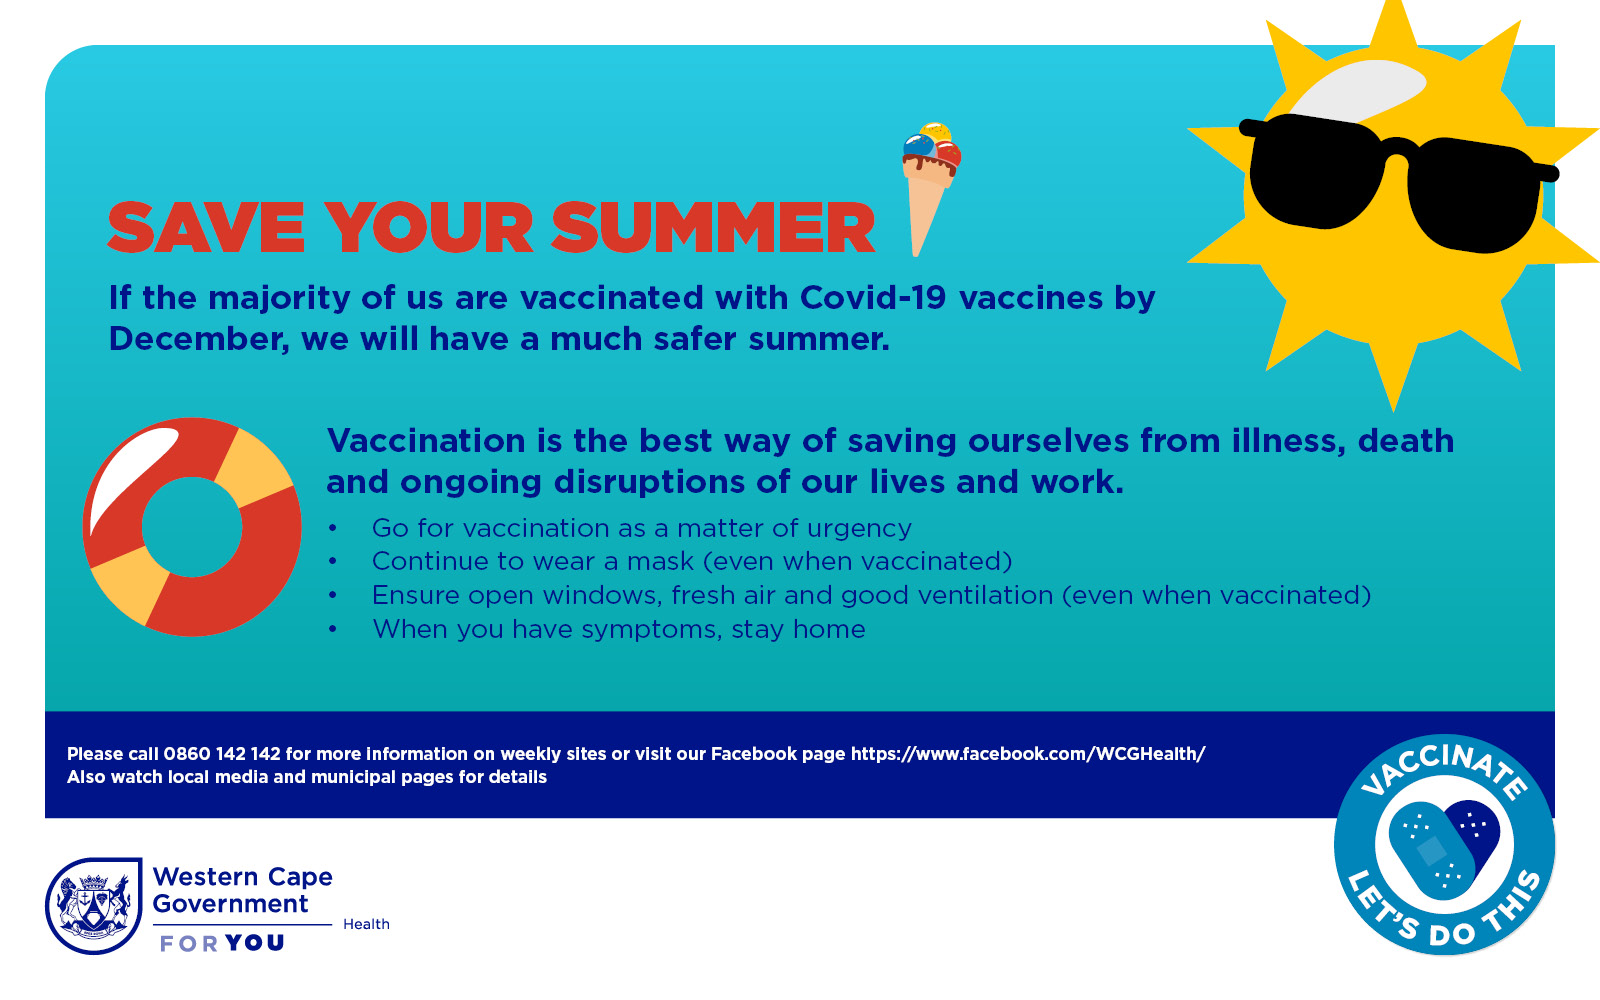 Save your summer: Vaccination means a safer summer - Save yourself from illness, death and disruption from Covid-19